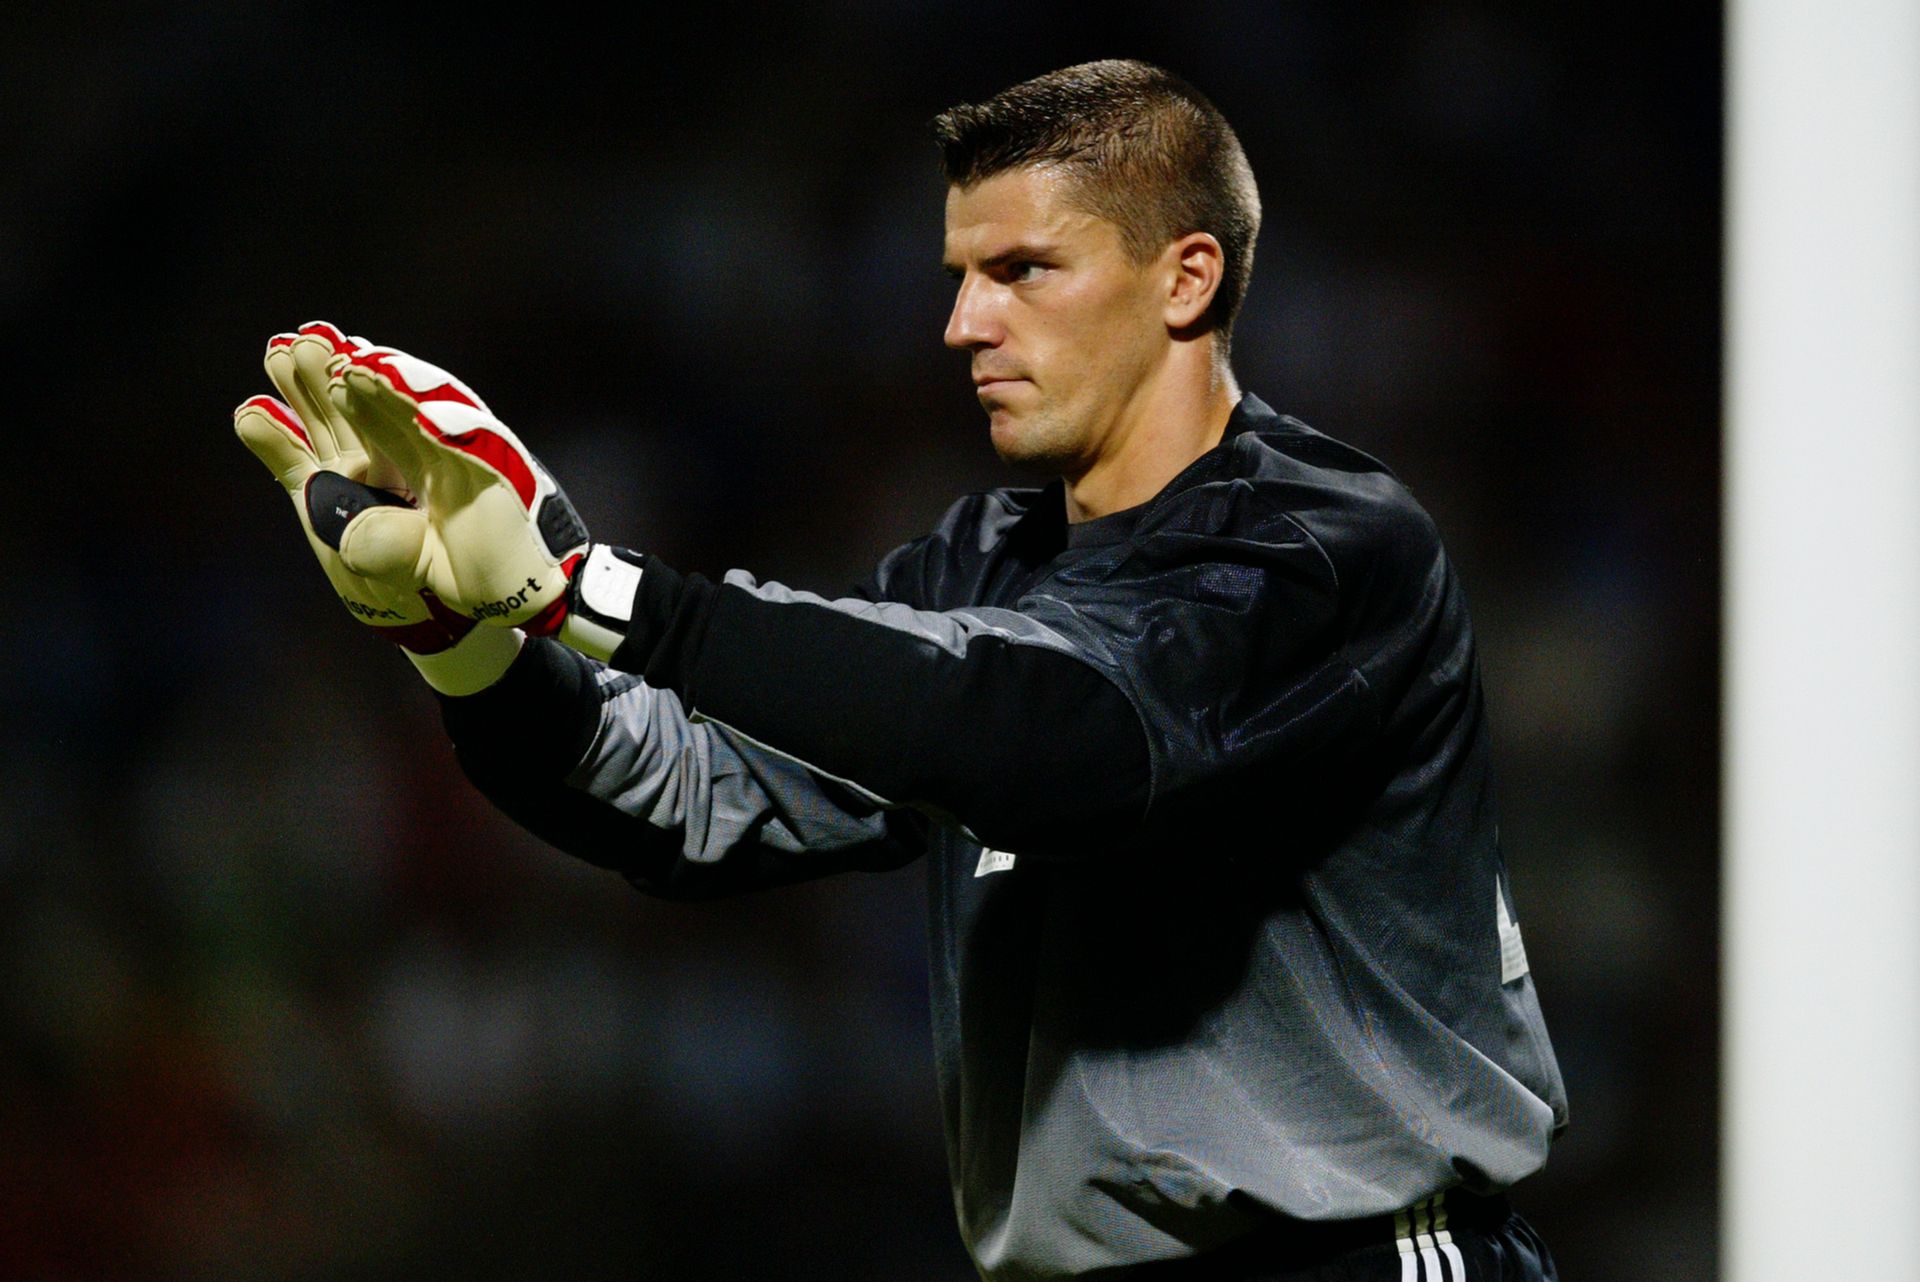 <p>                     Gregory Coupet was France's first-choice goalkeeper for much of the 2000s and the last line of defence for the successful Lyon side of that era.                   </p>                                      <p>                     With Lyon, he won seven Ligue 1 titles in a row and was named as the best goalkeeper in the competition on four occasions. Coupet won 34 caps for France, but was surprisingly left out of the team for the 2006 World Cup as Fabien Barthez returned in goal.                   </p>